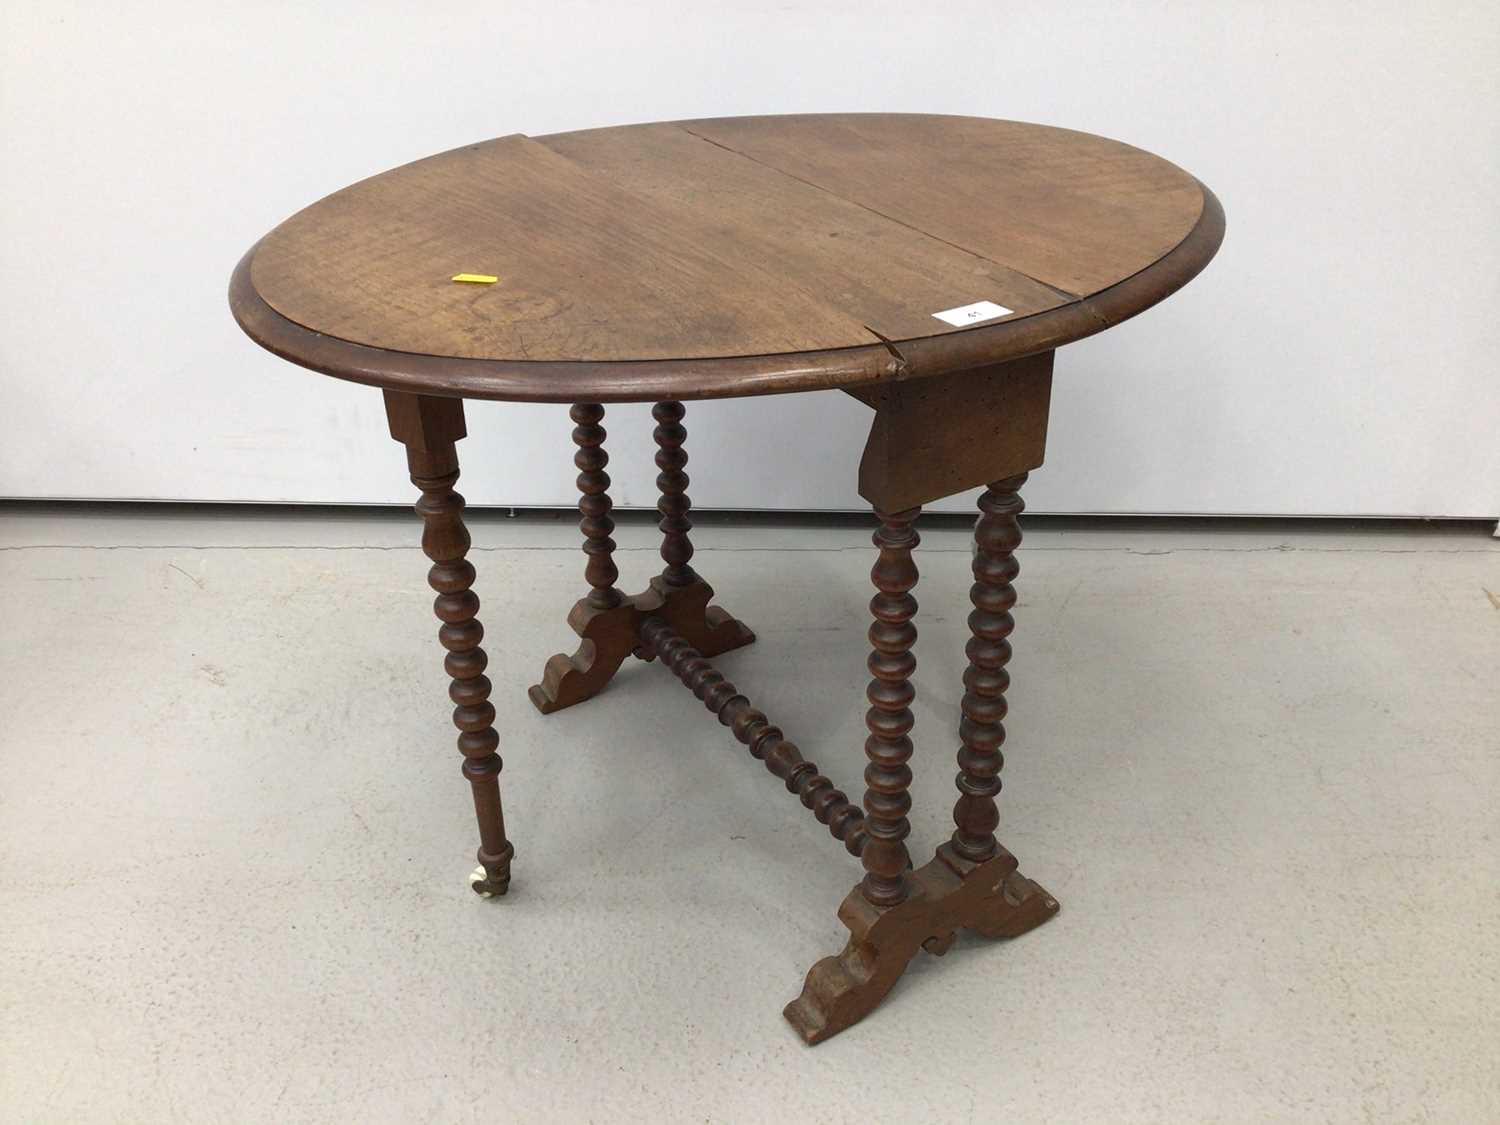 Lot 41 - Edwardian mahogany Sutherland table with oval drop-flap, on bobbin turned supports, 66cm when open x 53cm wide x 50cm high